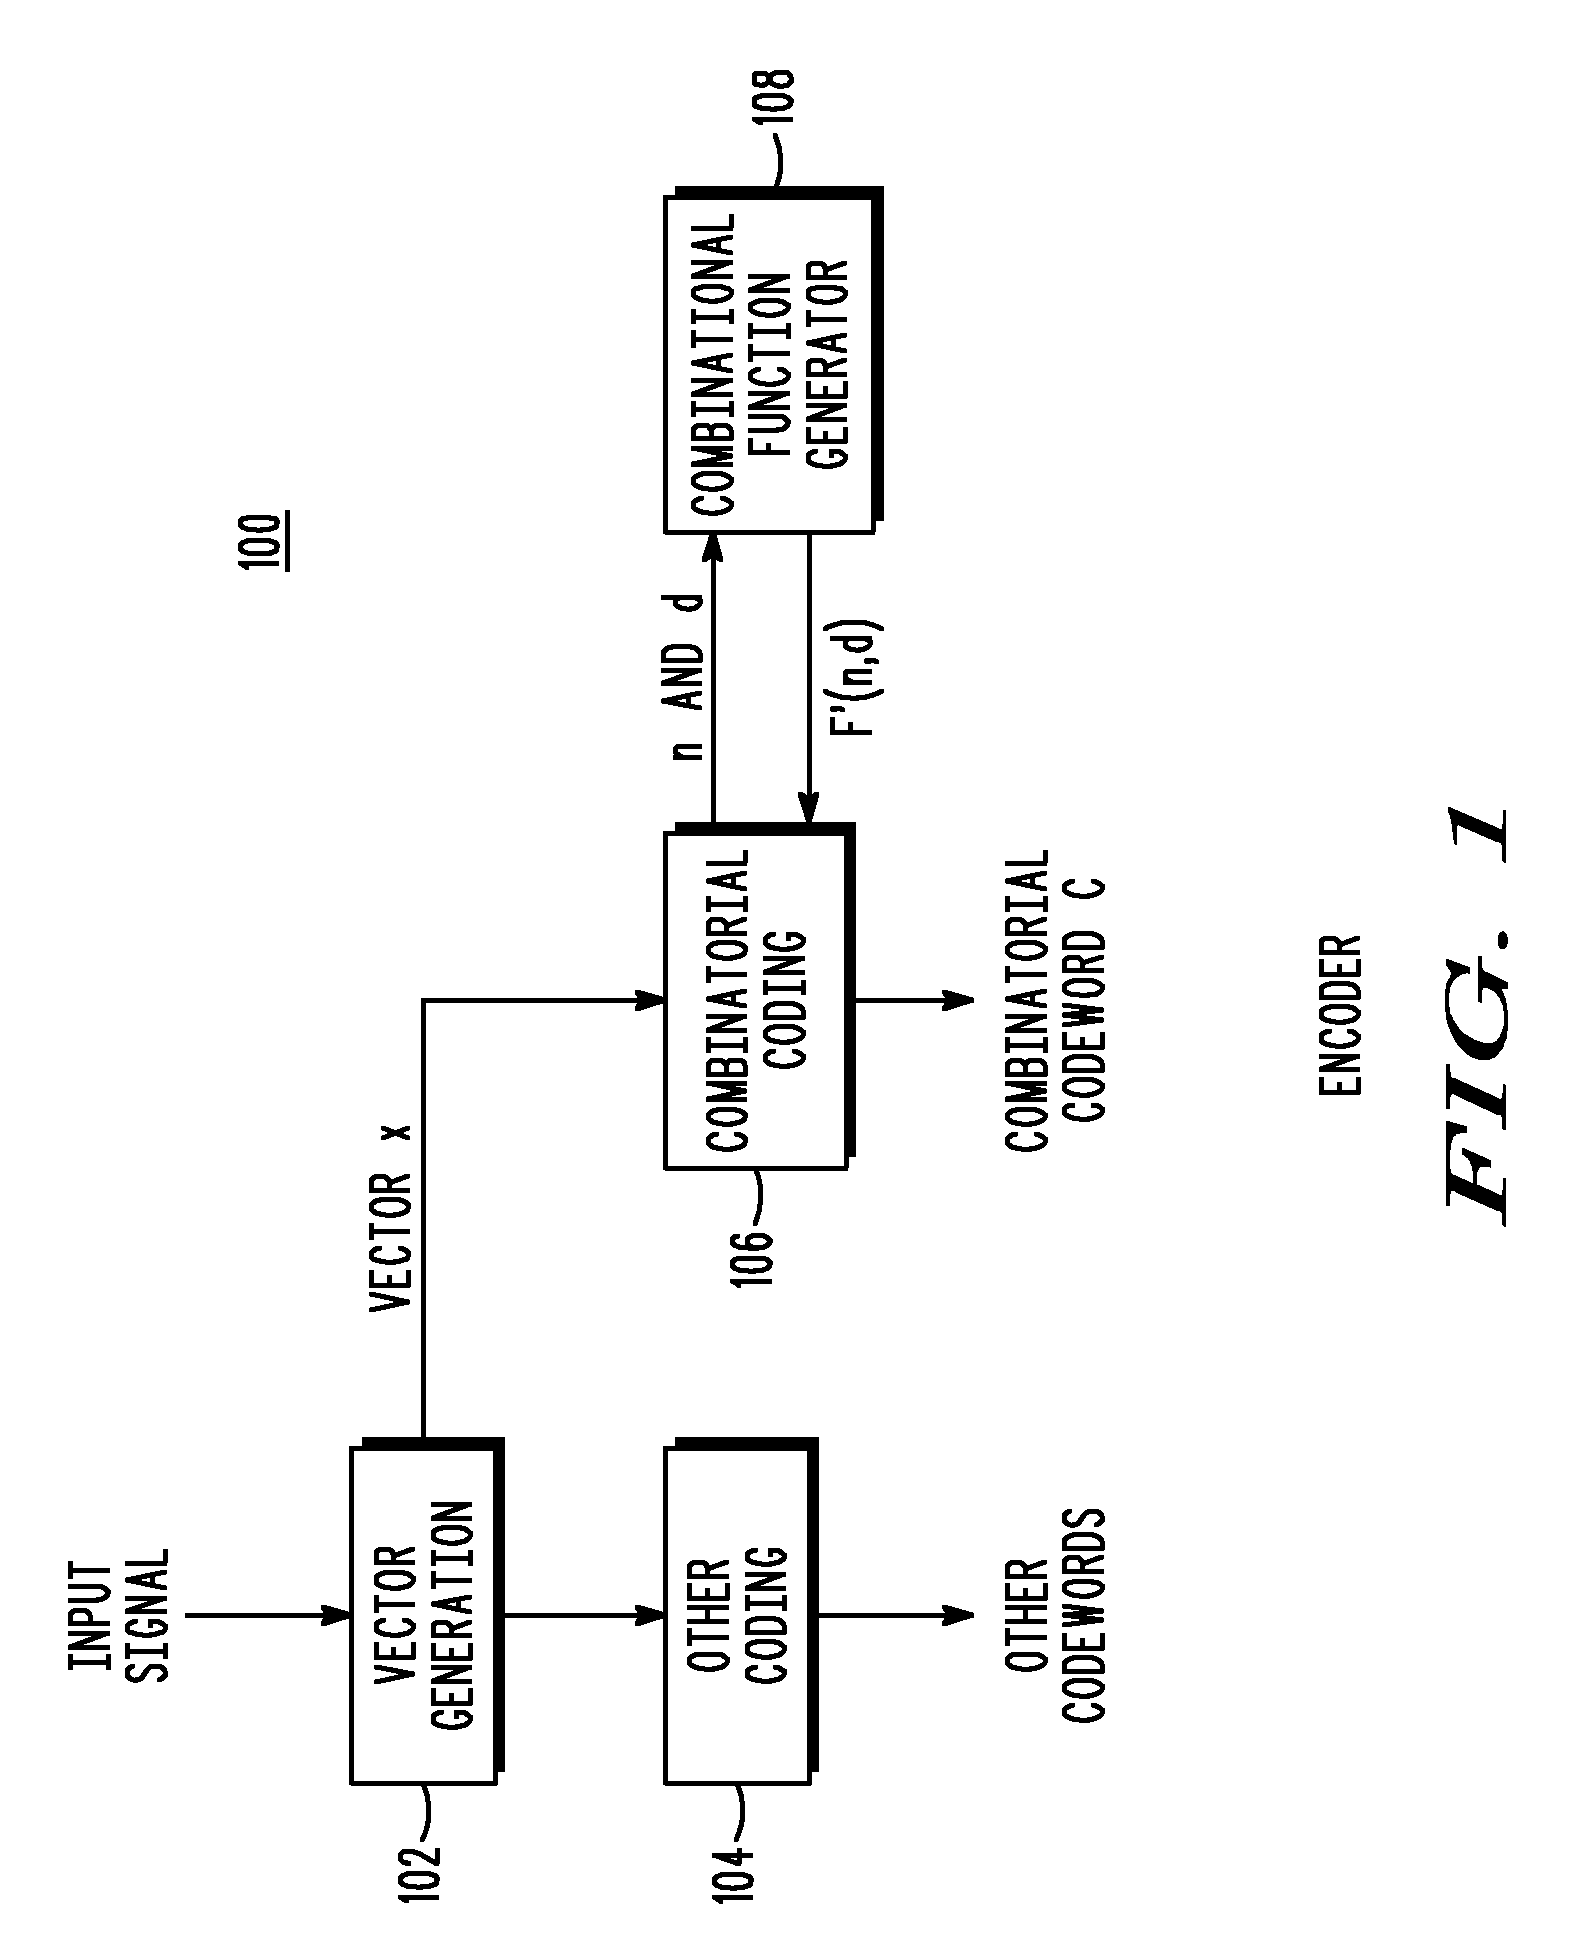 Method and apparatus for low complexity combinatorial coding of signals